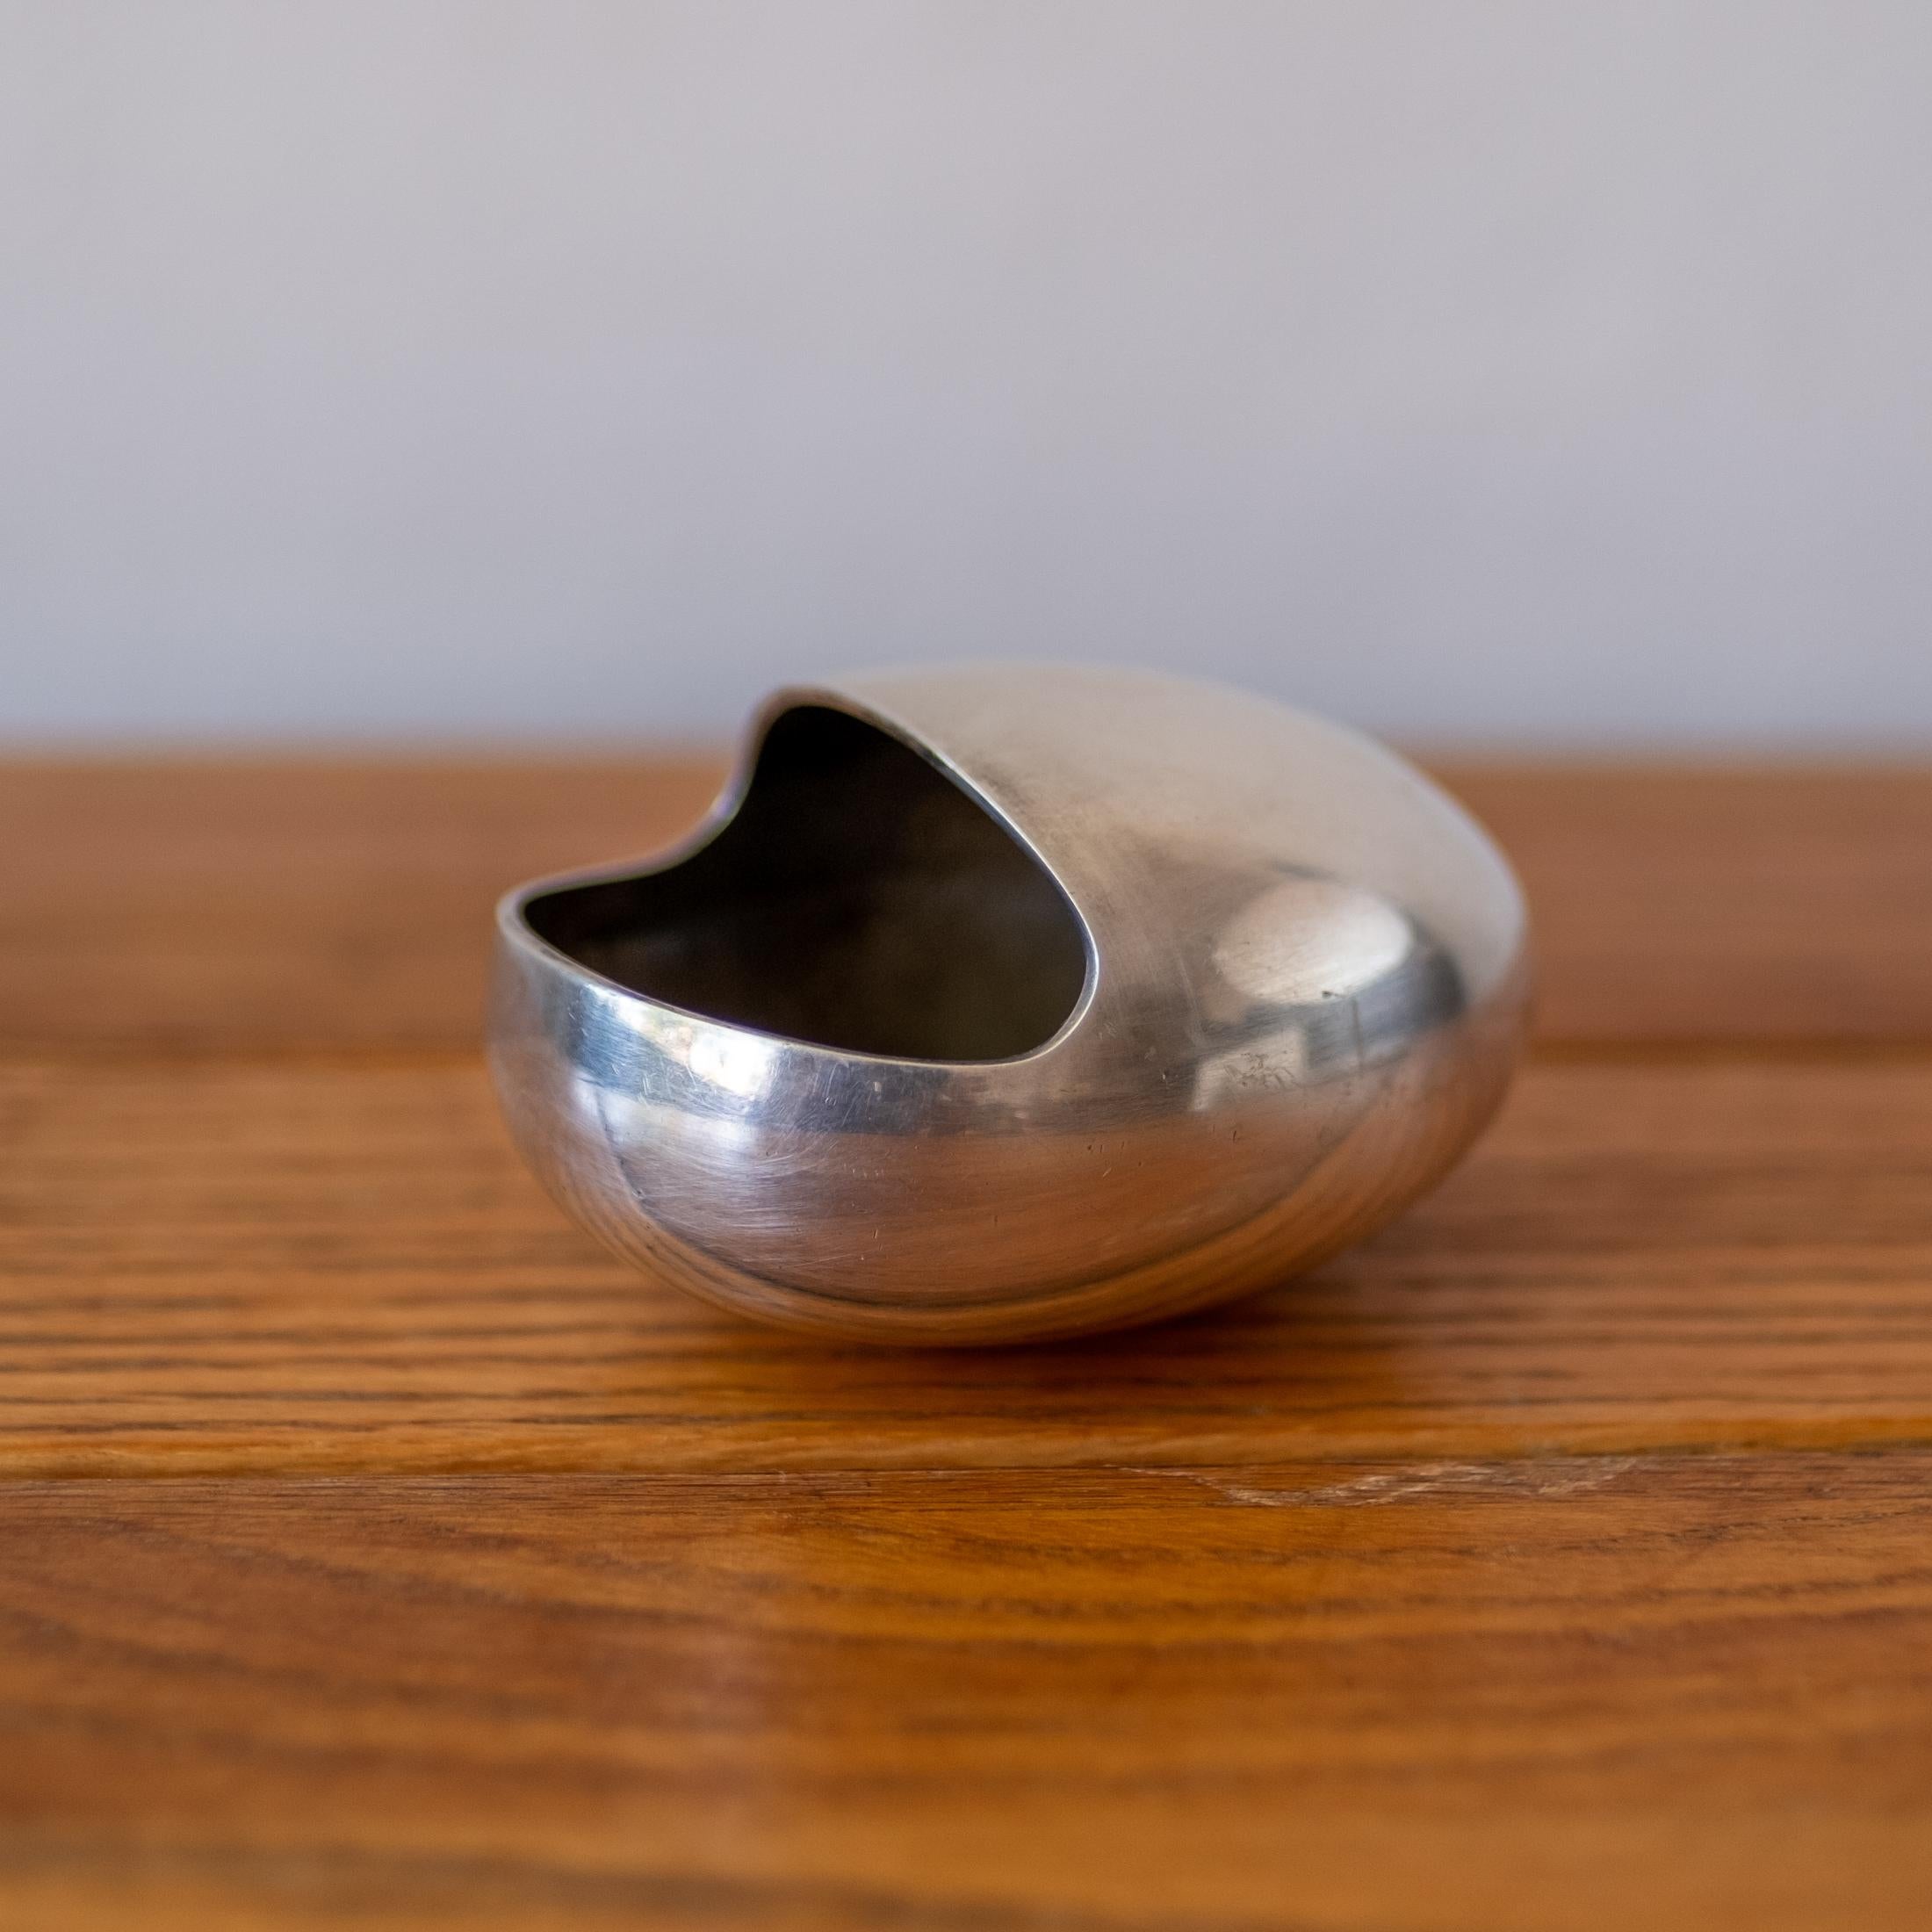 Danish Modernist Silver Plate Ashtray or Incense Burner by Carl Cohr, 1950s For Sale 2